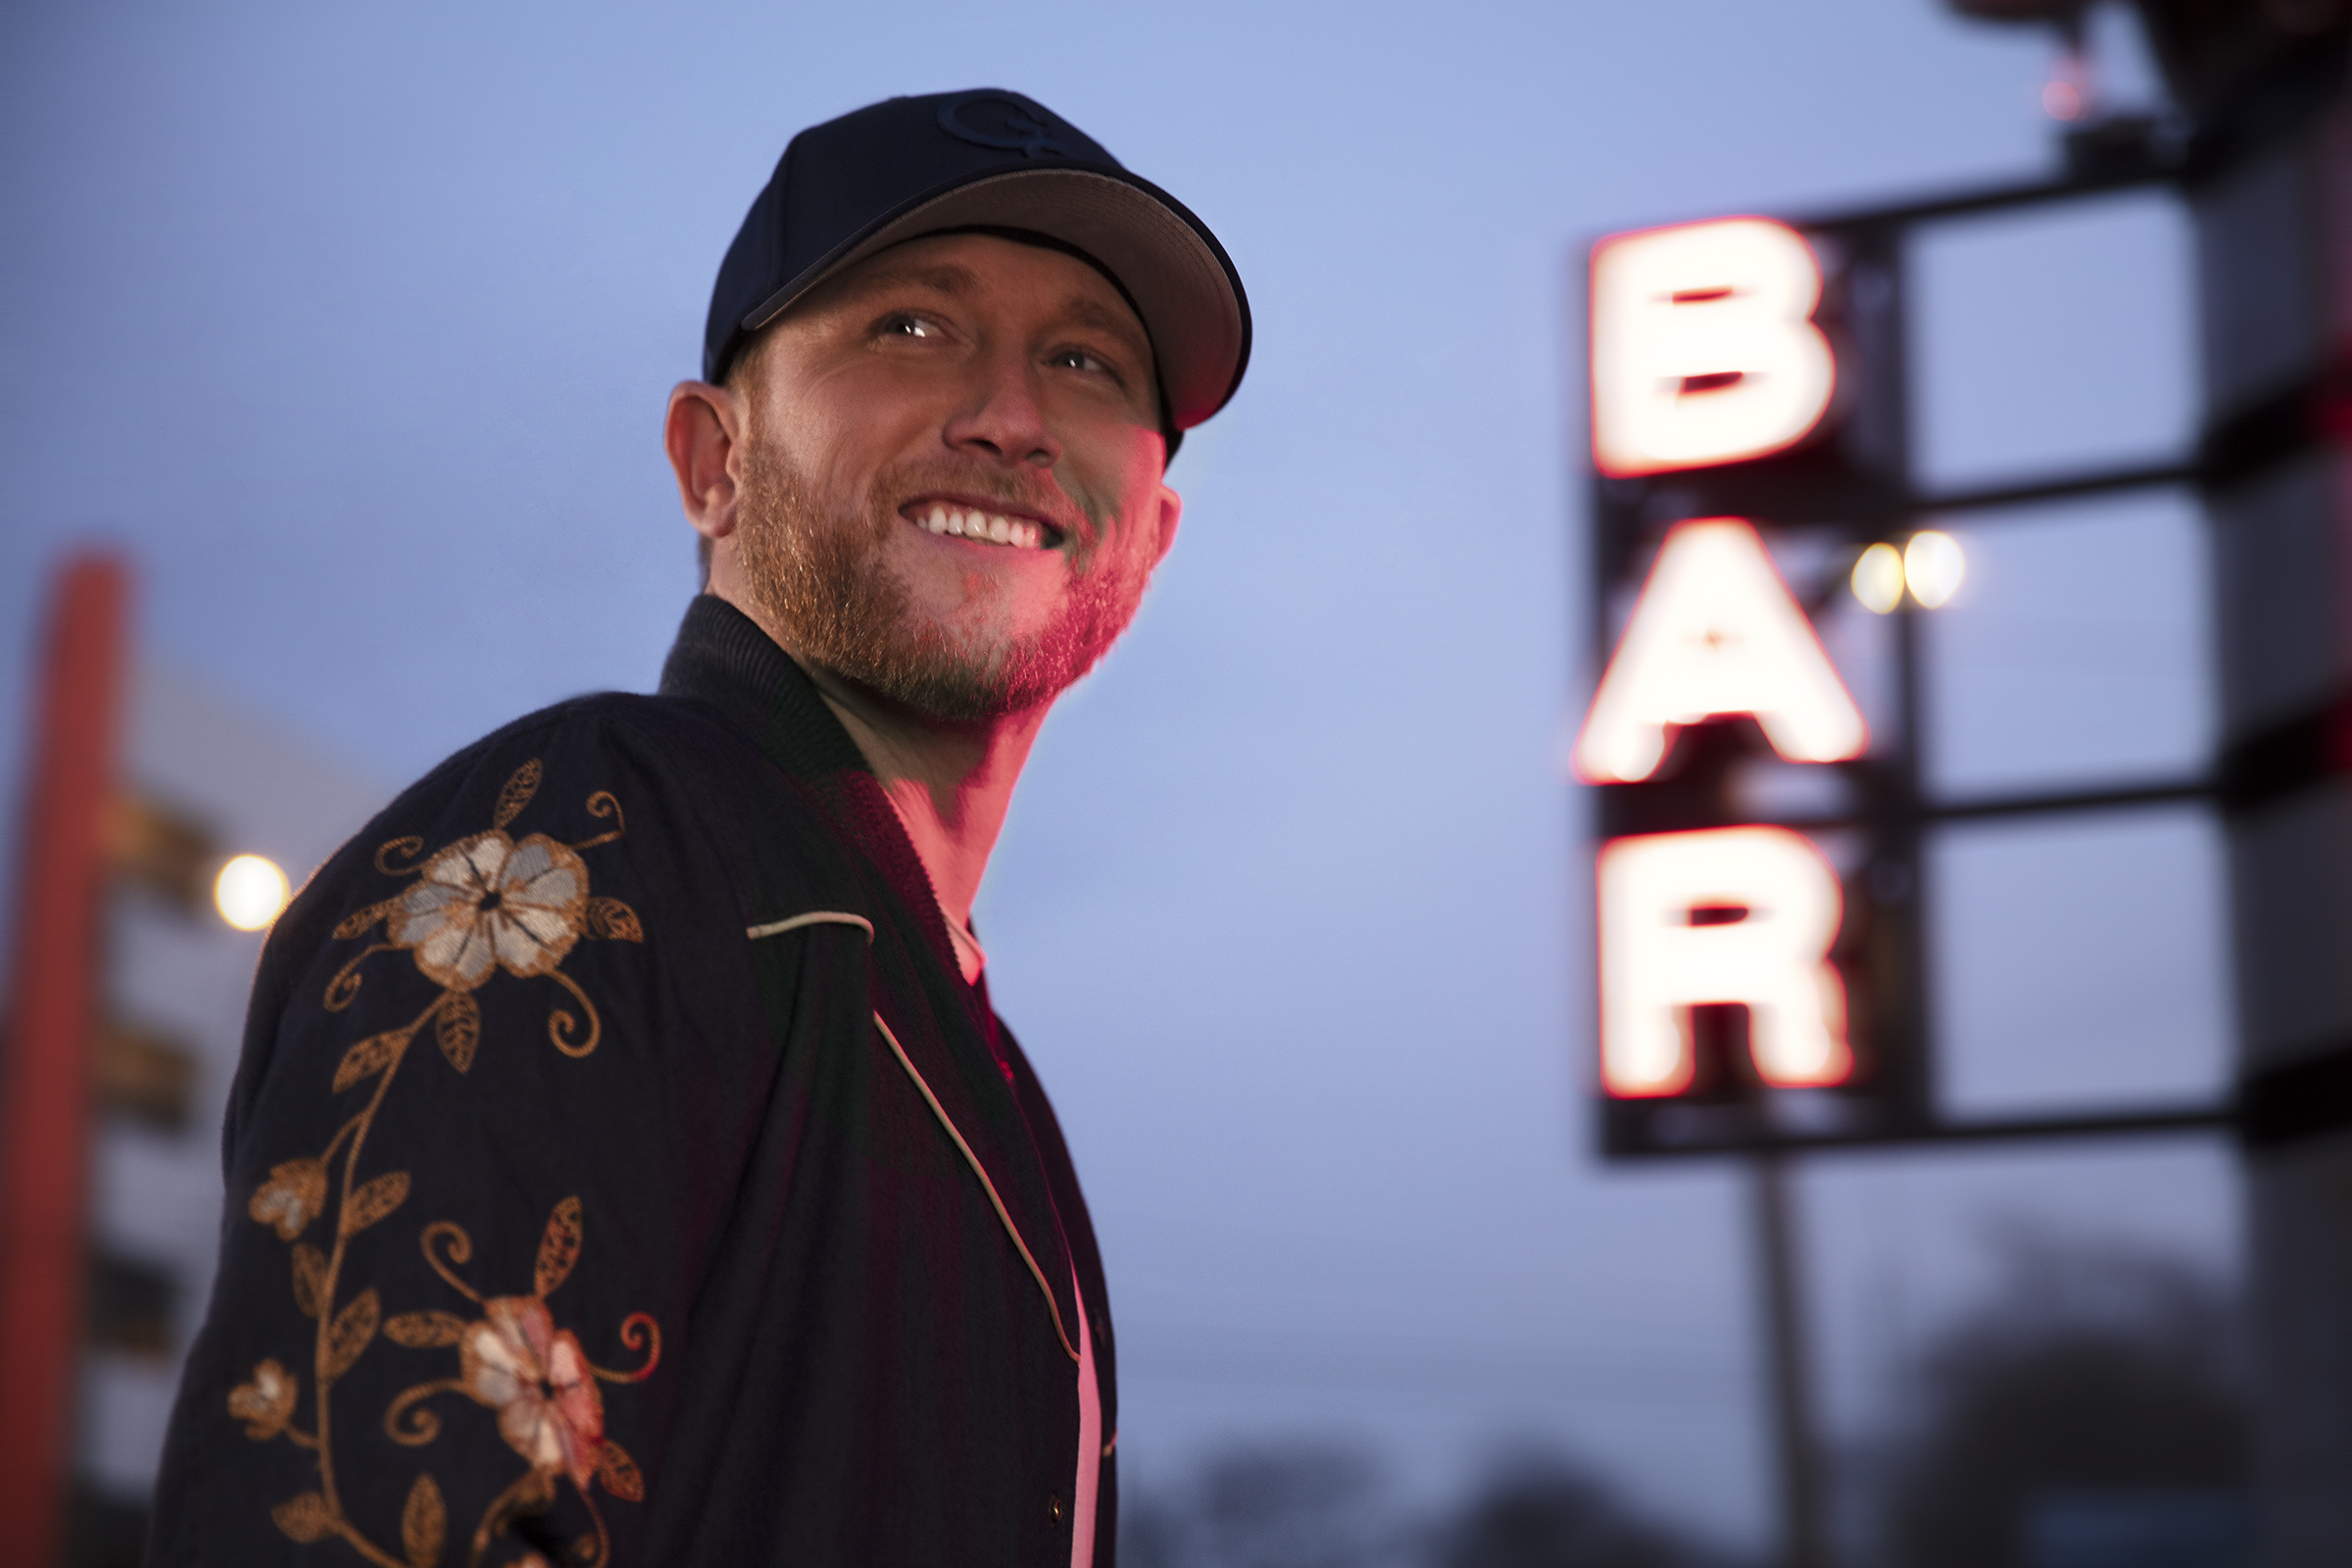 COLE SWINDELL’S NEW SONG “SINGLE SATURDAY NIGHT” TO BECOME HIS 11TH CAREER SINGLE 